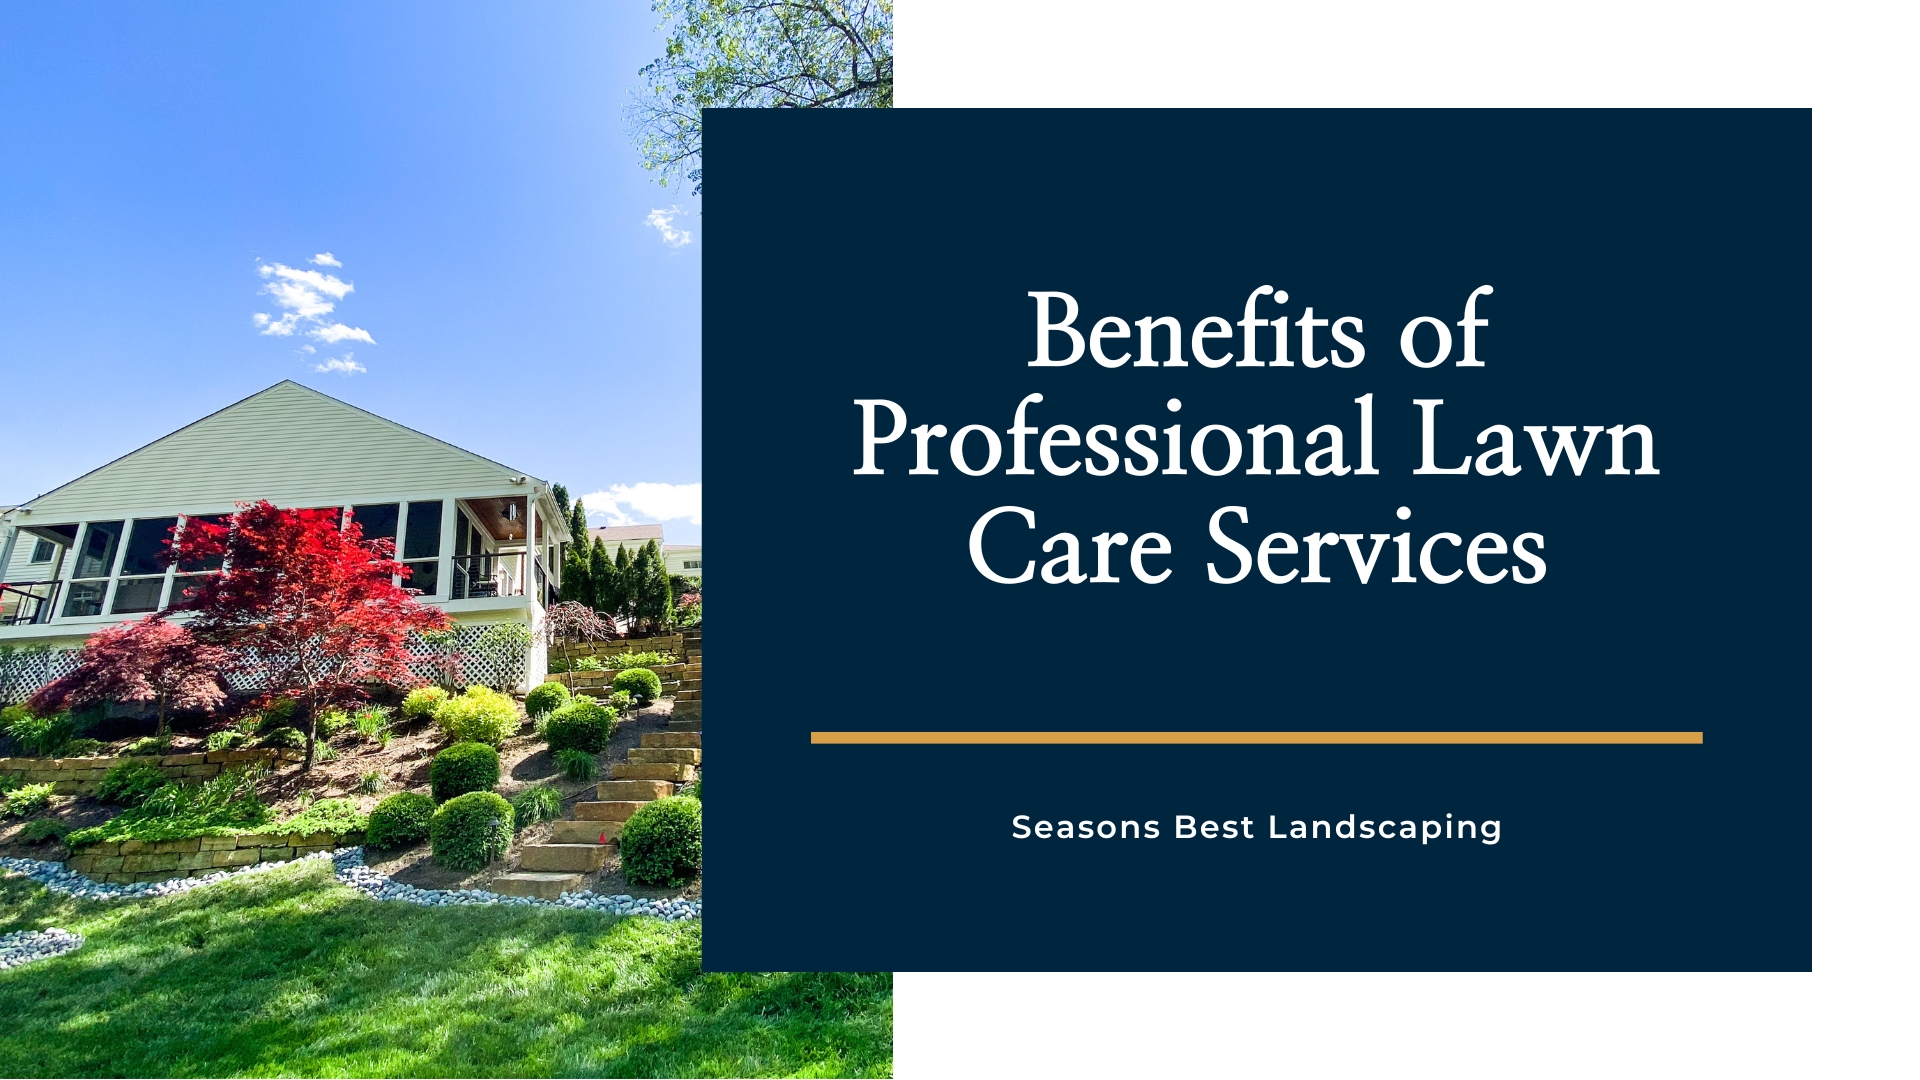 Benefits of Professional Lawn Care Service Blog Image - Seasons Best Landscaping